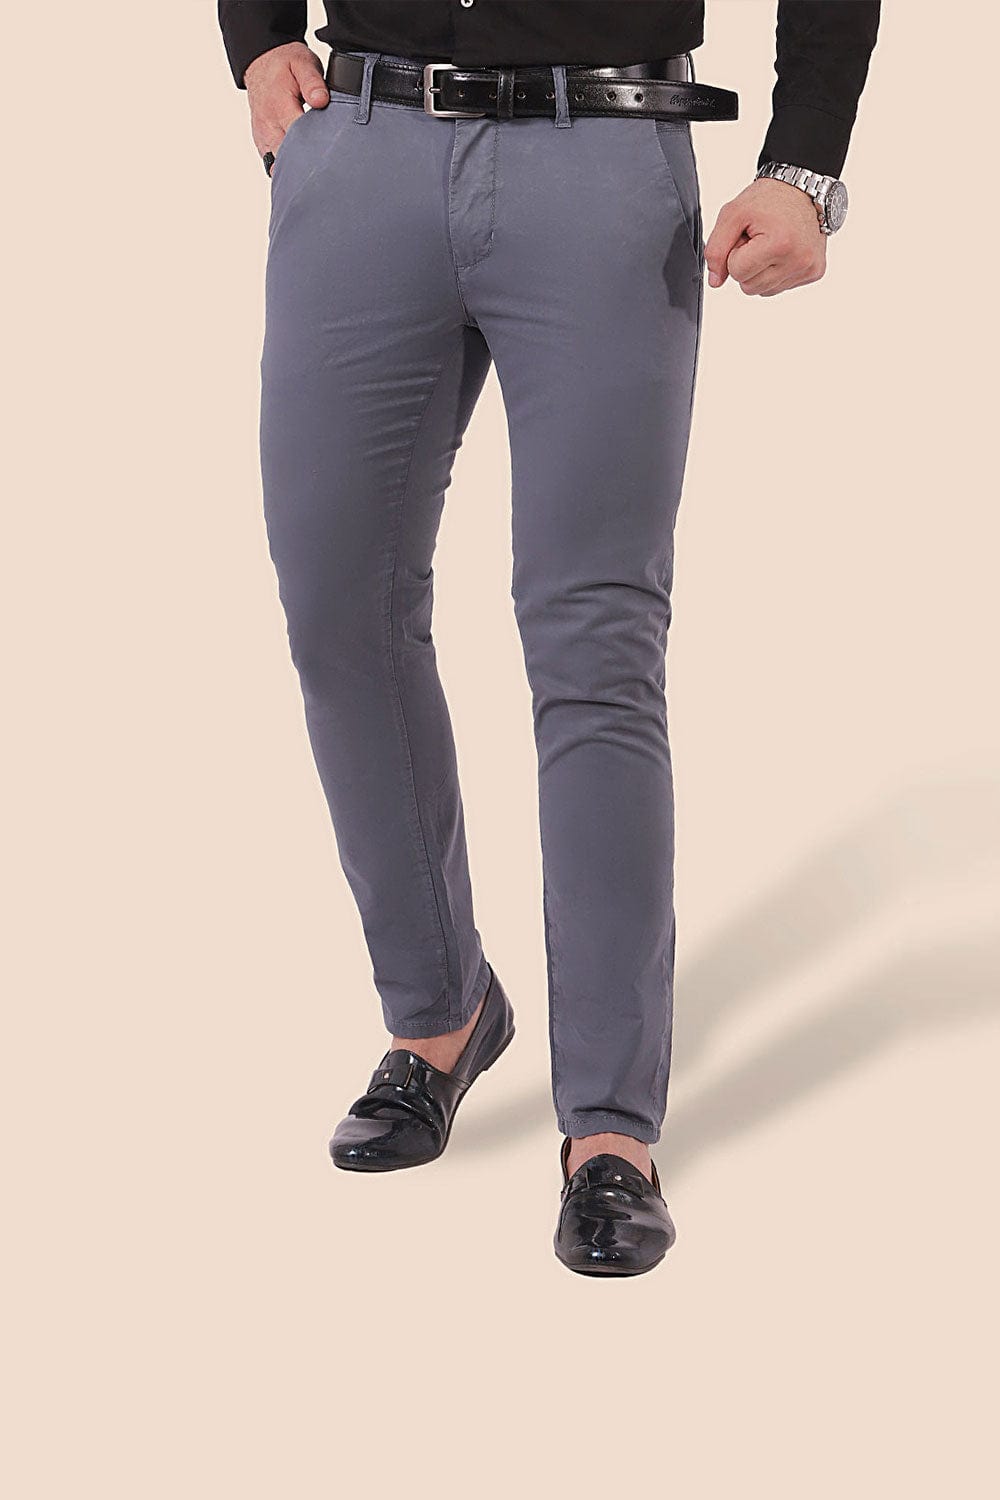 Hope Not Out by Shahid Afridi Men Chino Slim Fit Chino